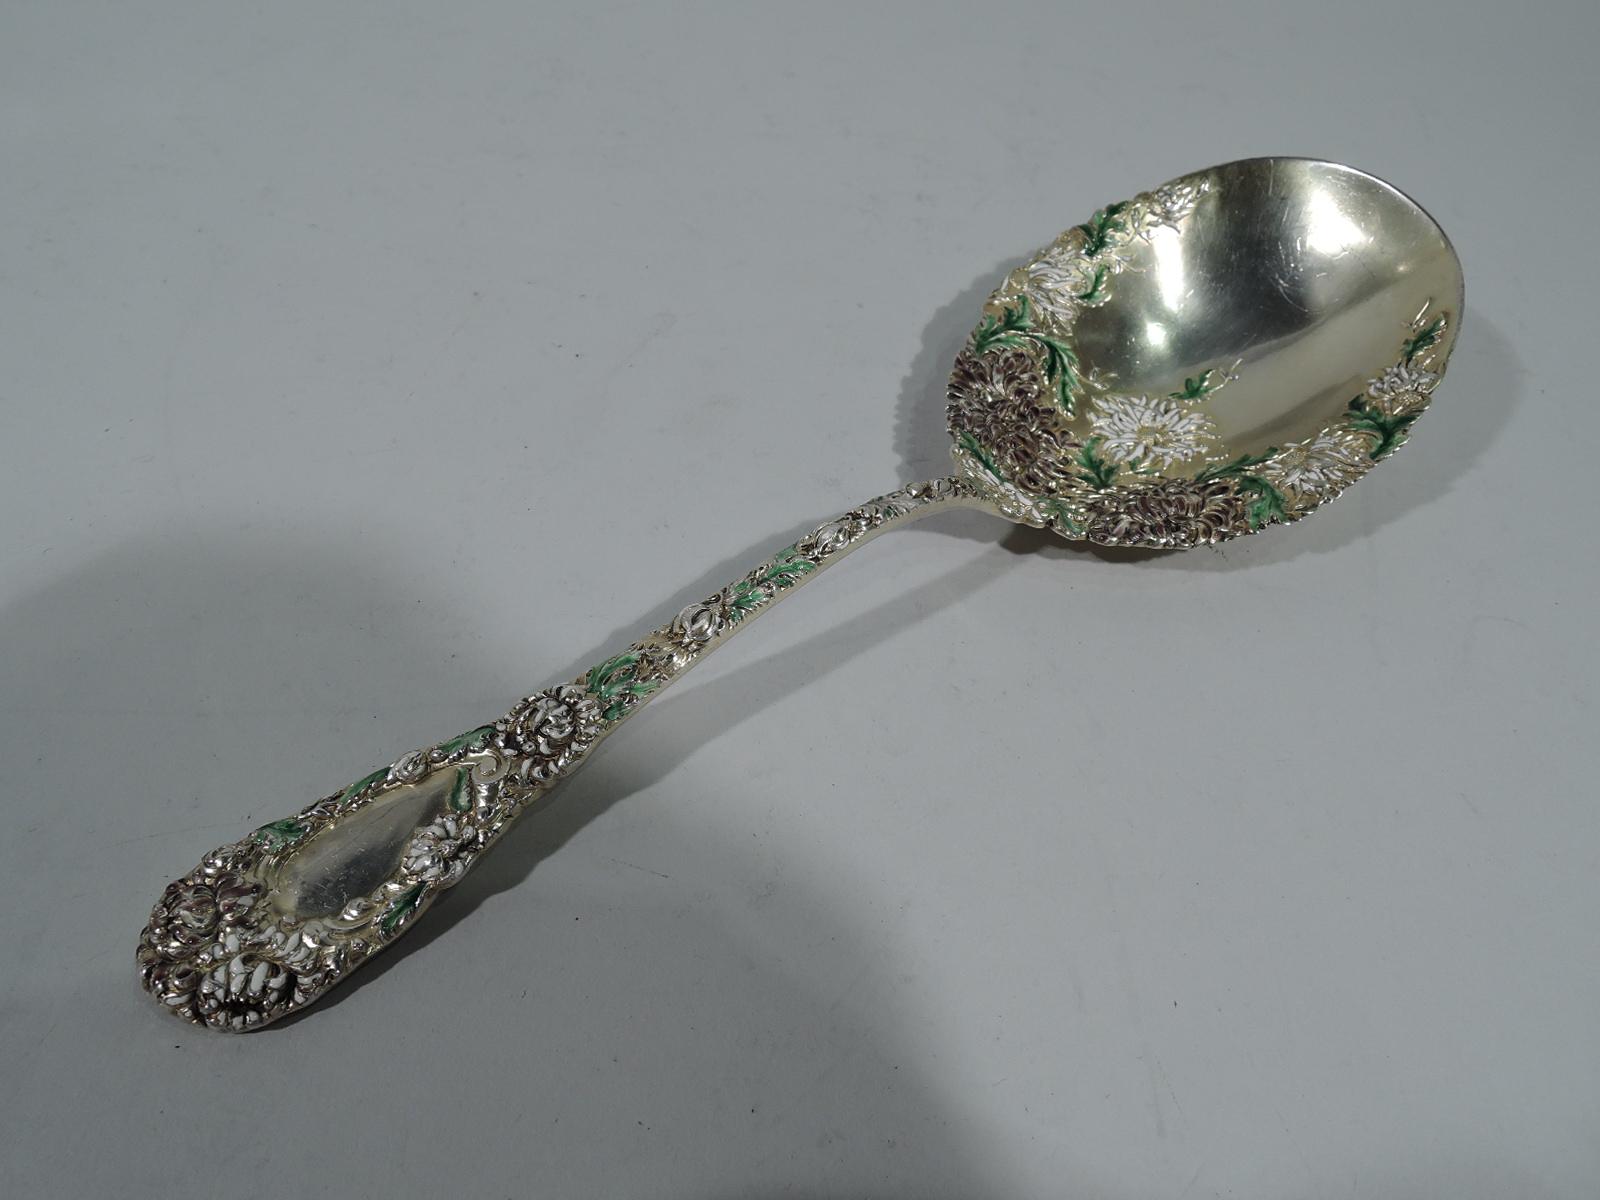 Antique Japonesque gilt sterling silver and enamel berry spoon in Chrysanthemum pattern. Made by Durgin in Concord, New Hampshire. Tapering handle with round terminal and oval bowl. Raised double-sided ornament comprising dense flower heads and